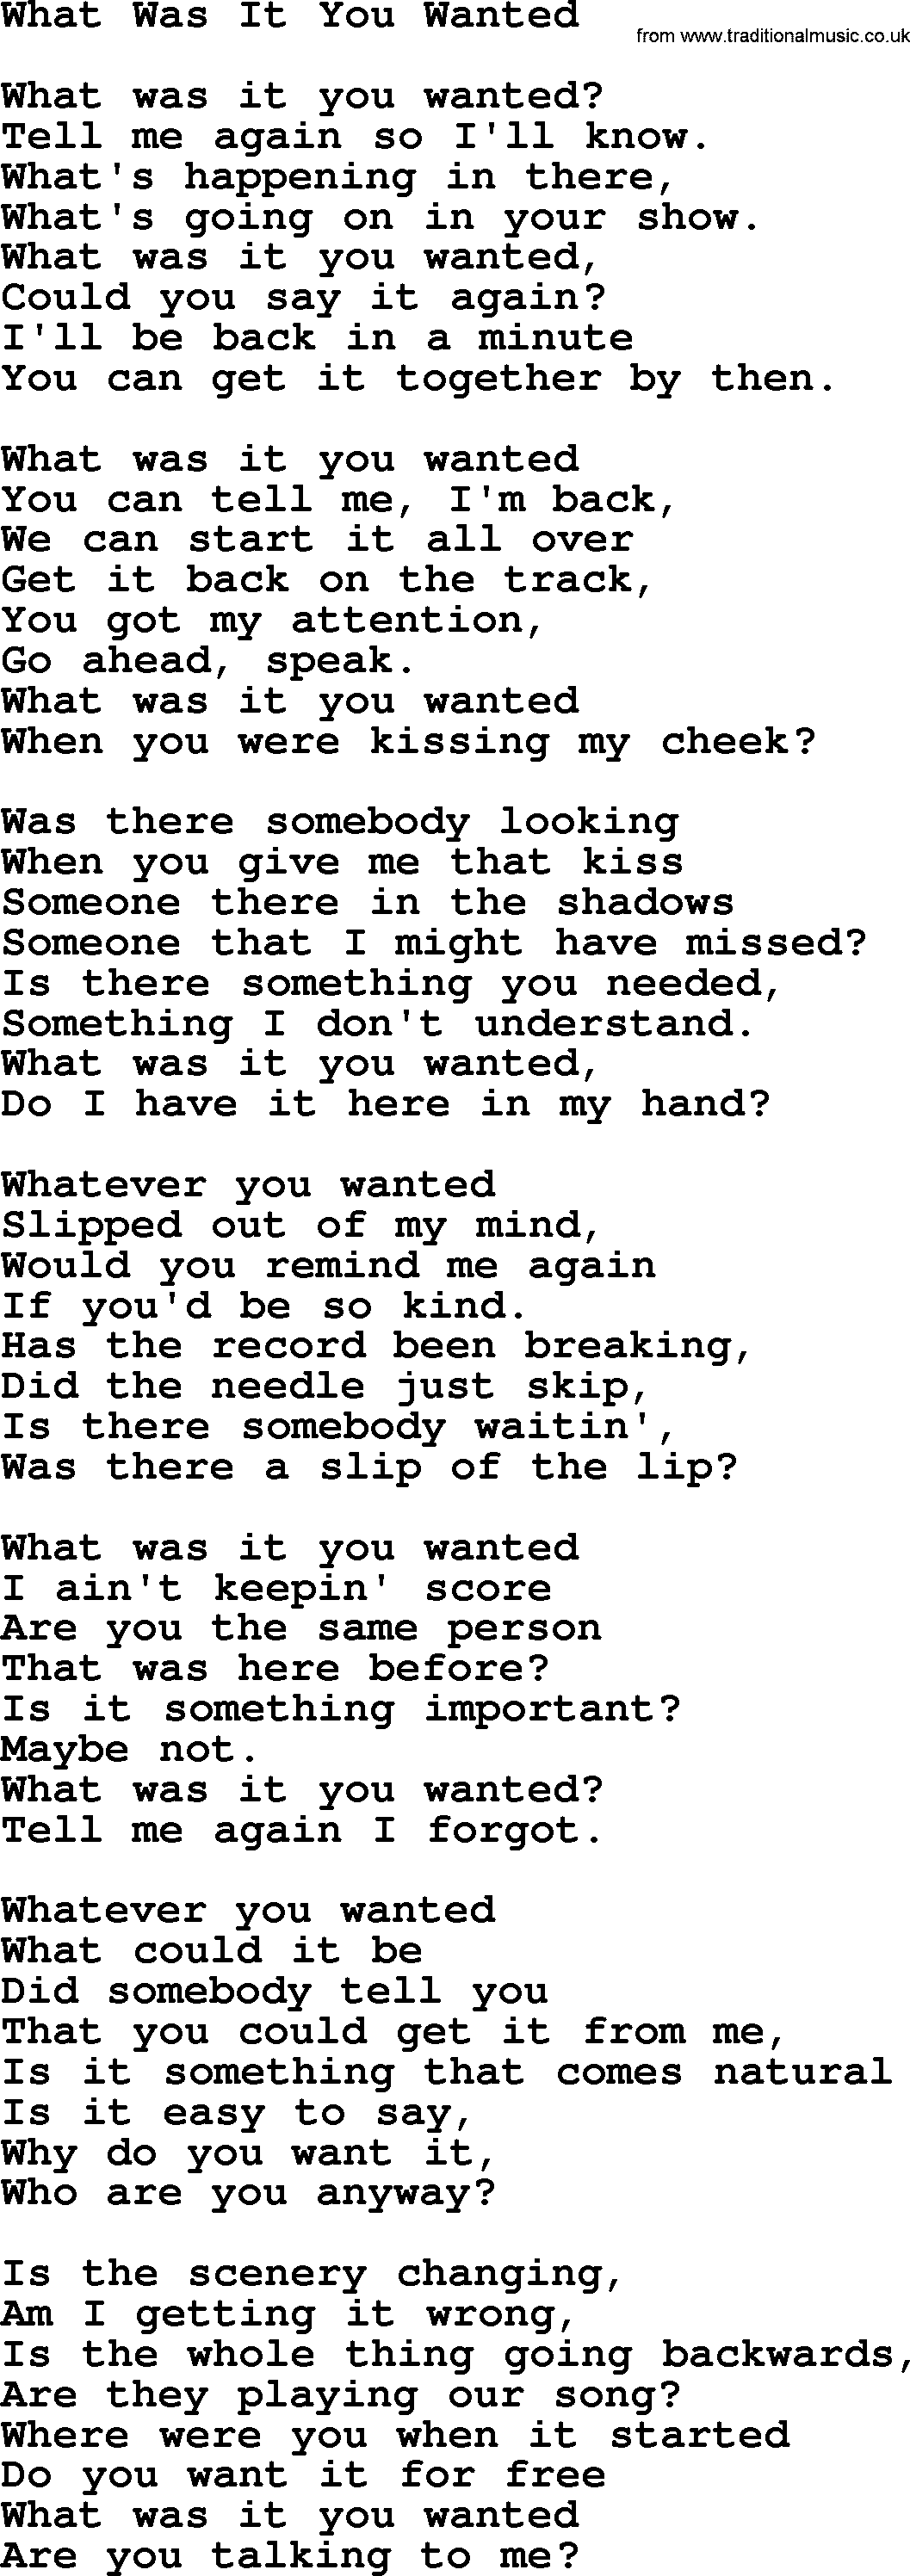 Willie Nelson song: What Was It You Wanted lyrics